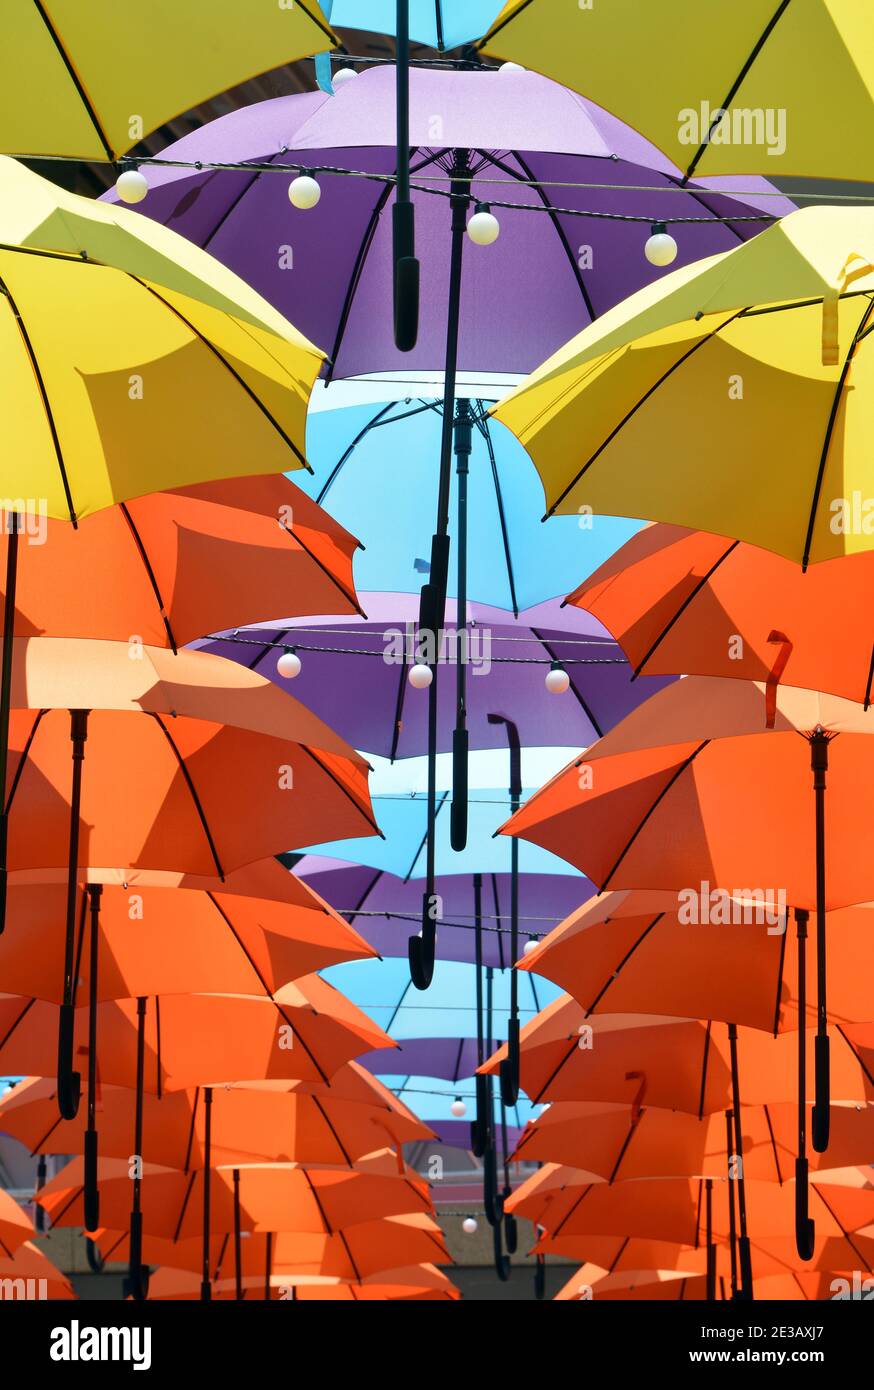 Plenty of umbrellas shelter shoppers from the sun in Shenzhen, China. Rows  of colourful brollies to keep the sun out. Lots of interesting patterns  Stock Photo - Alamy